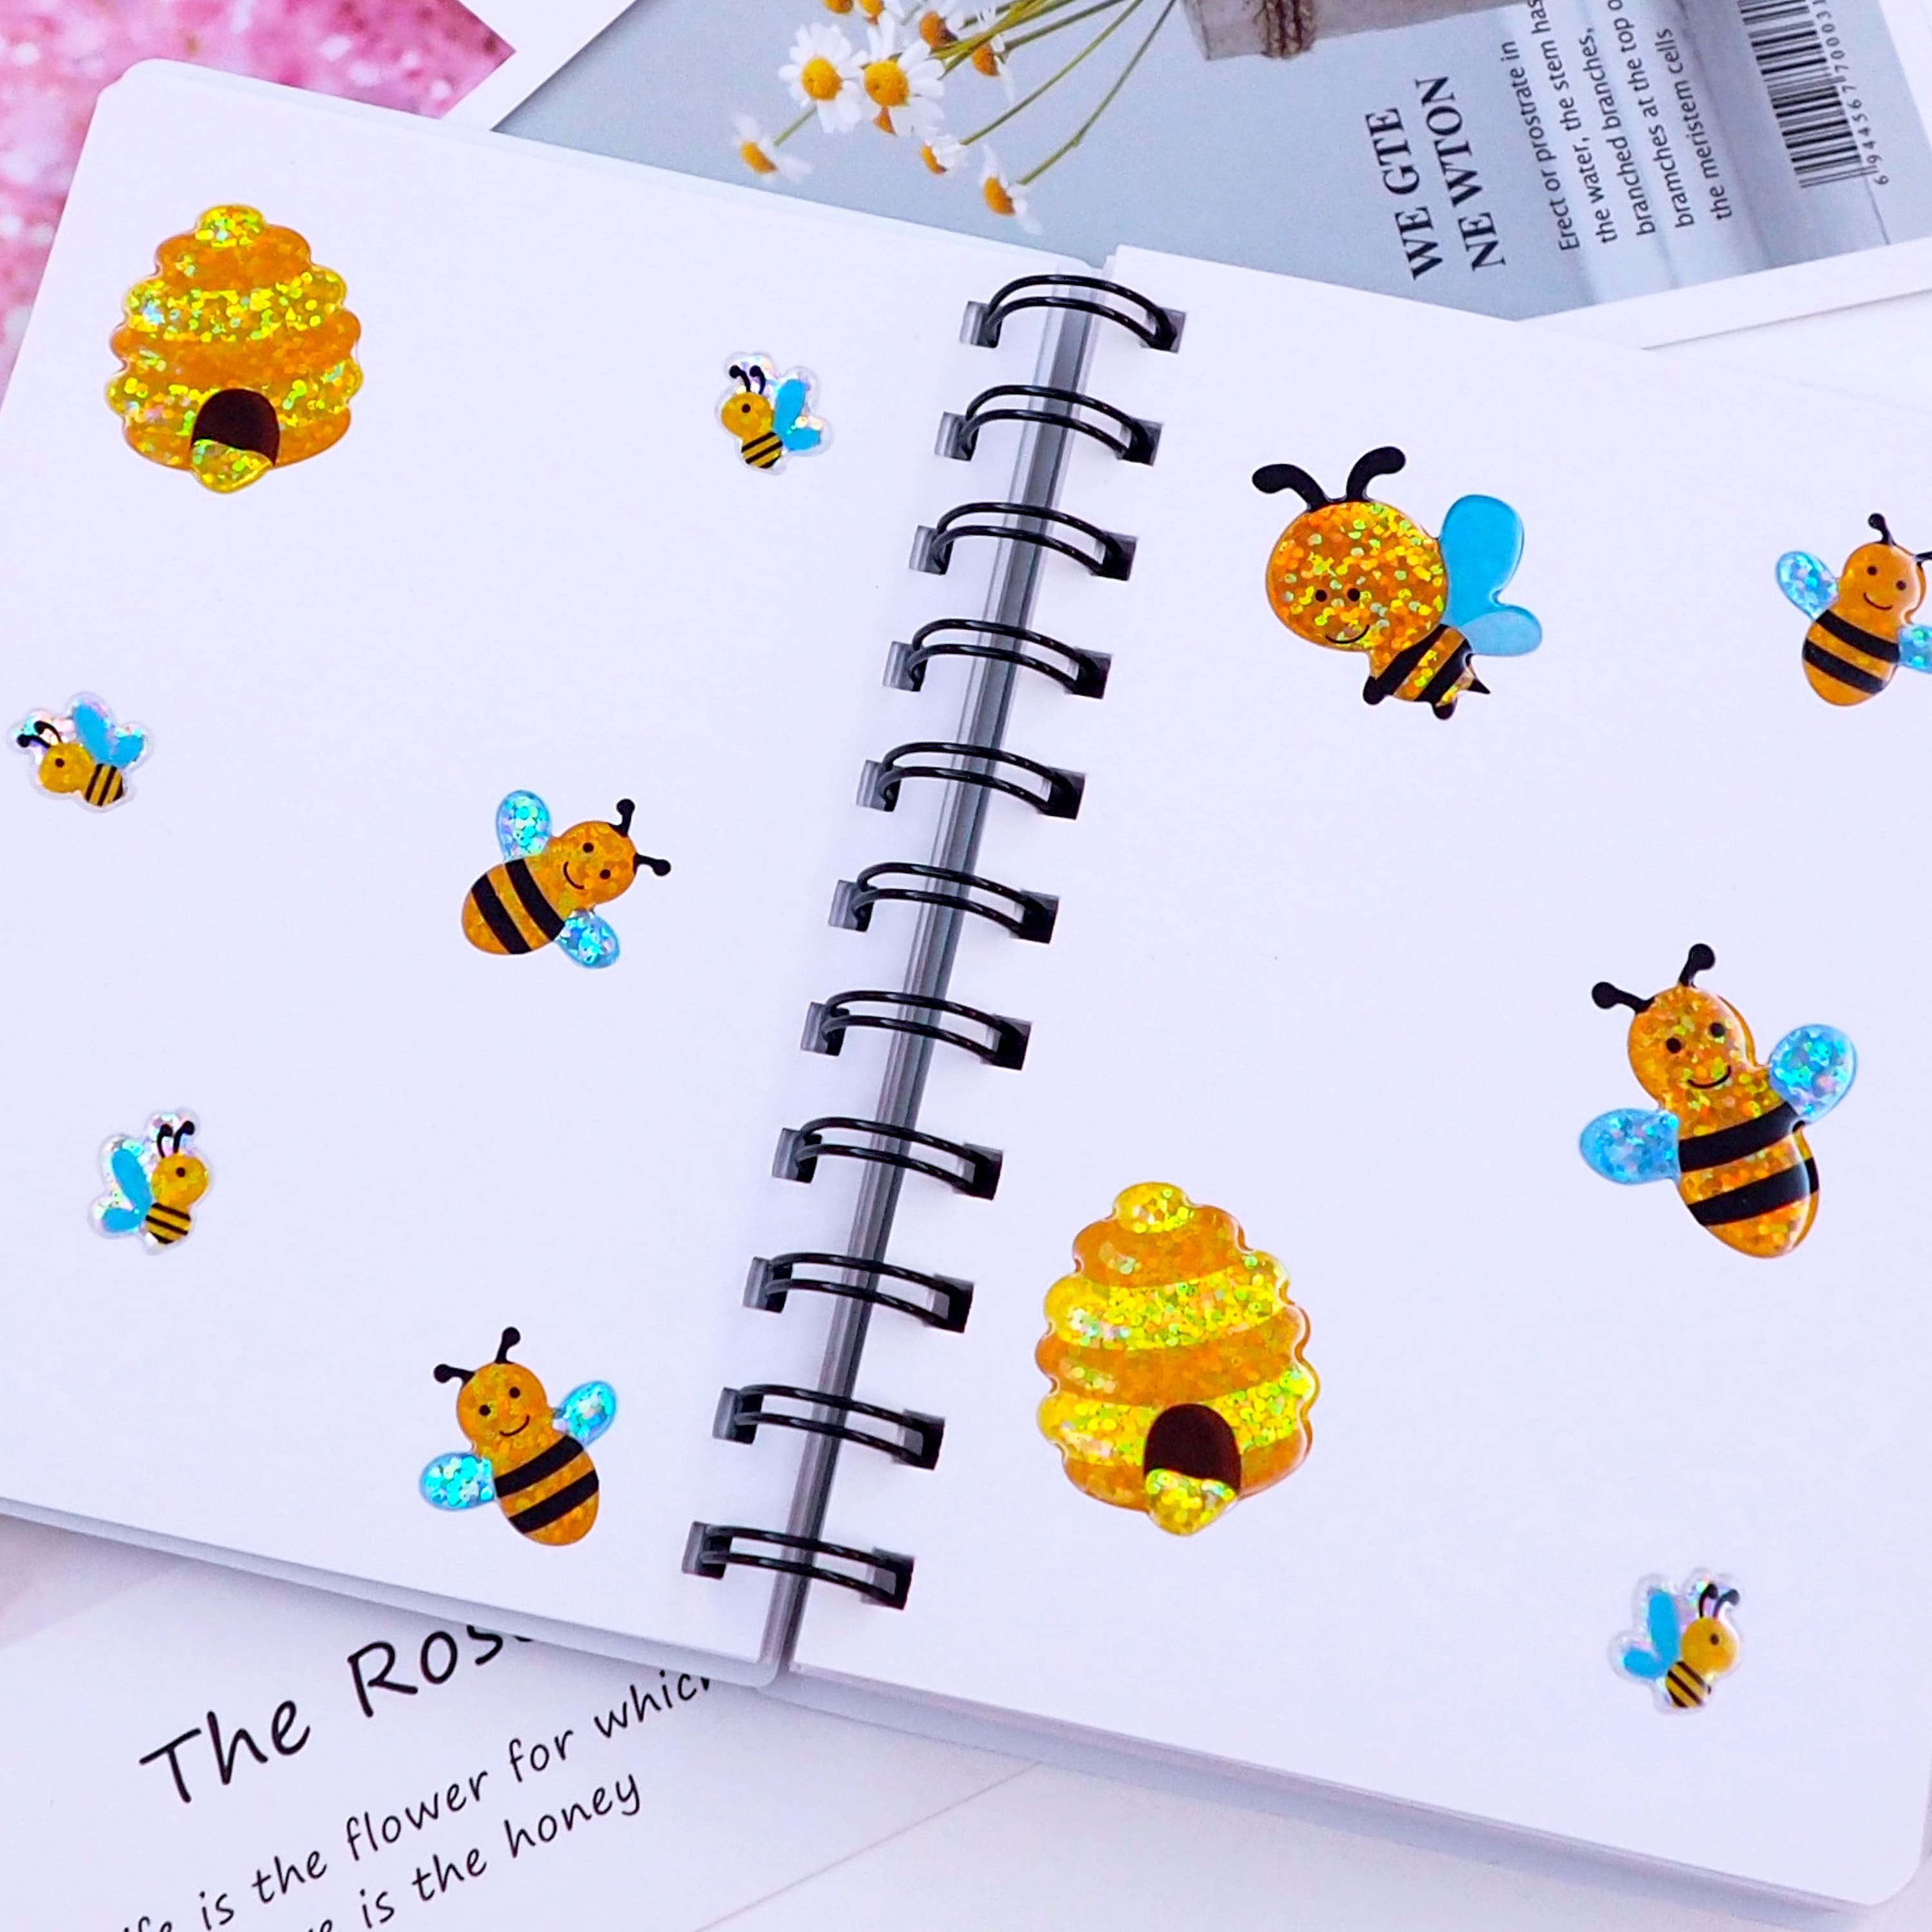 9X12MM Wood Bumble Bees Stickers Self Adhesive Easter Crafts Toppers Embellishments For Scrapbooking Cardmaking Pack of 150 Yellow